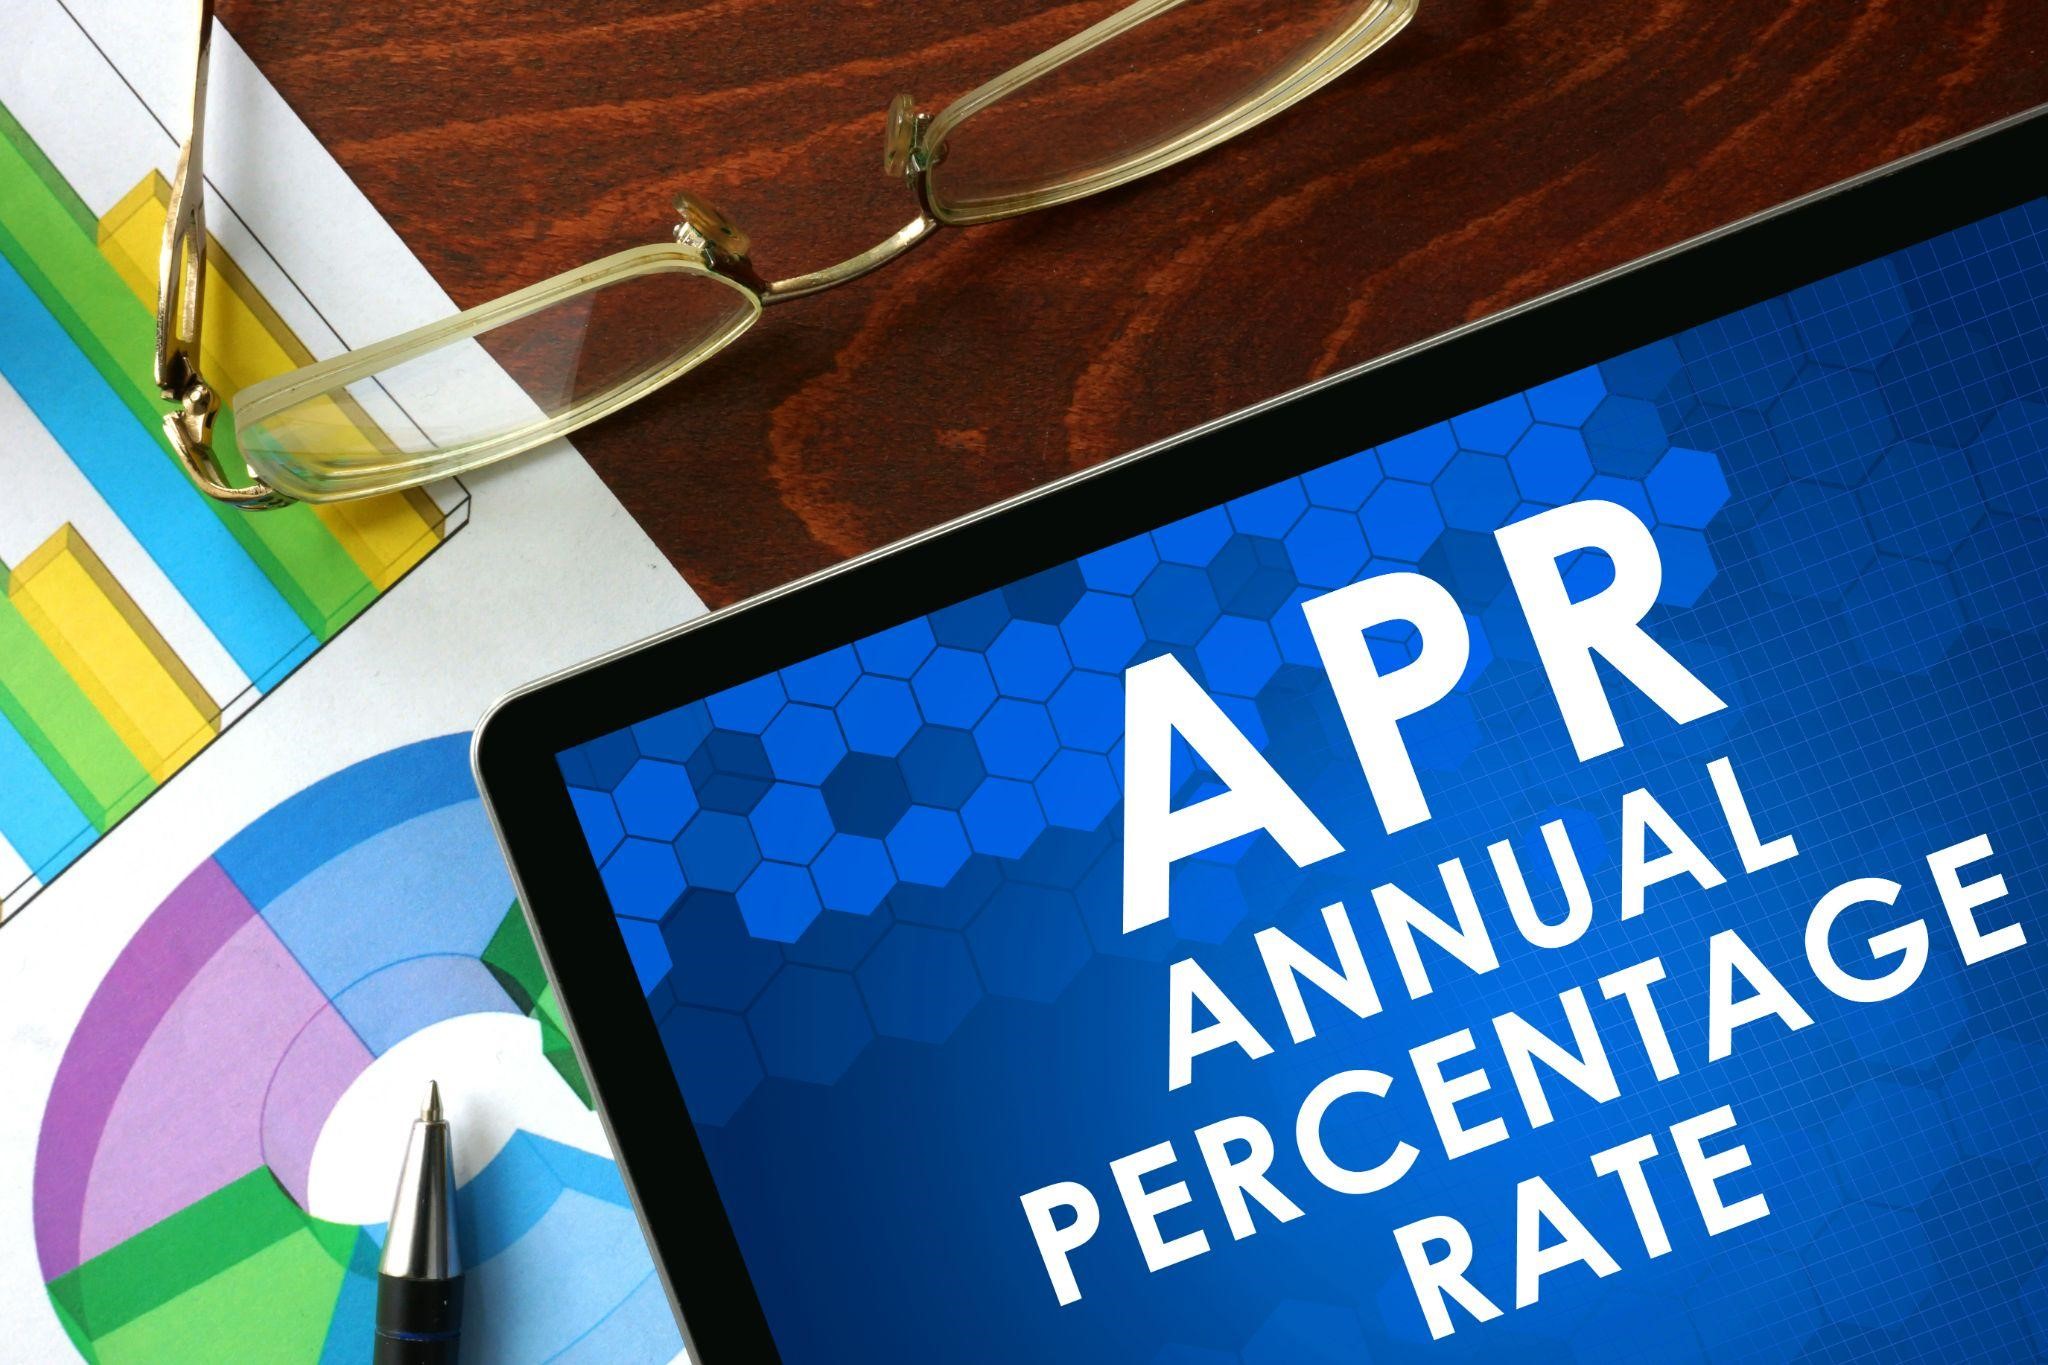 Annual Percentage Rate